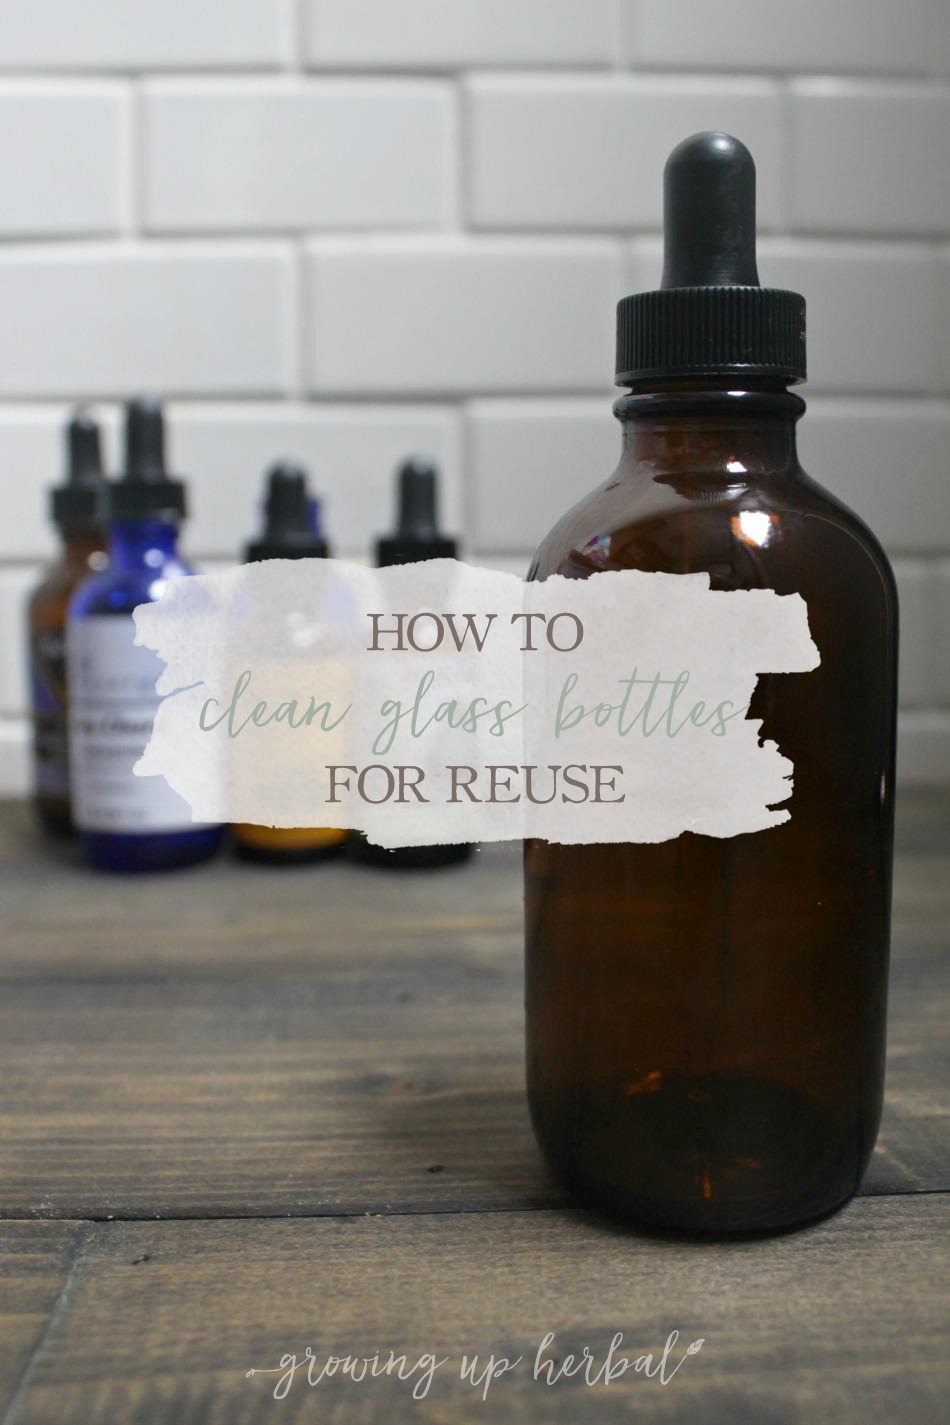 How To Clean Glass Bottles For Reuse | Growing Up Herbal | Learn how to clean glass bottles so you can reuse them for herbal tinctures, infused oils, or essential oil blends.